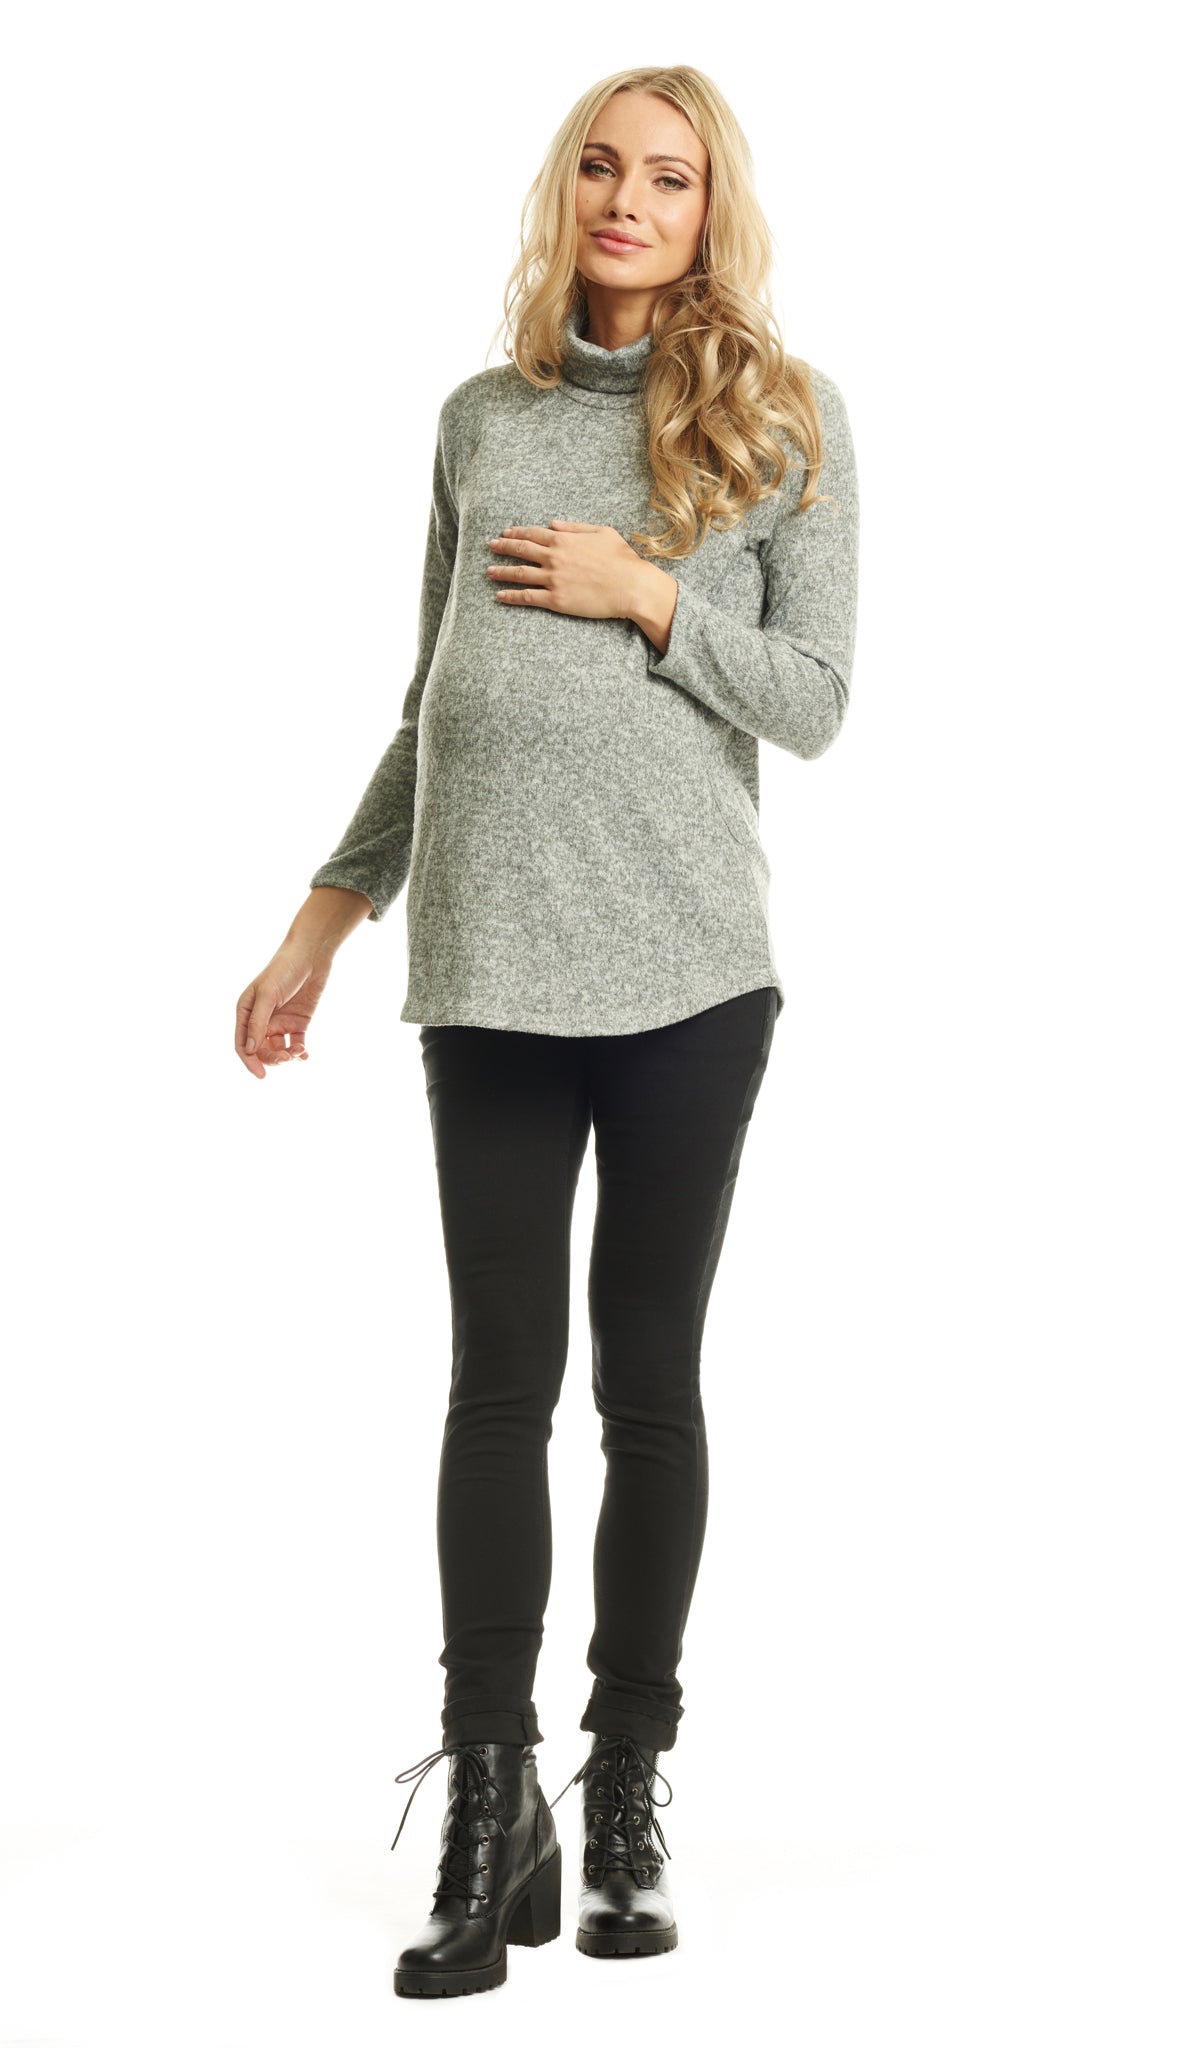 Heather Grey Teresa Sweater. Full length shot of pregnant woman wearing Teresa Sweater with one hand on her belly with black pant and black booties.